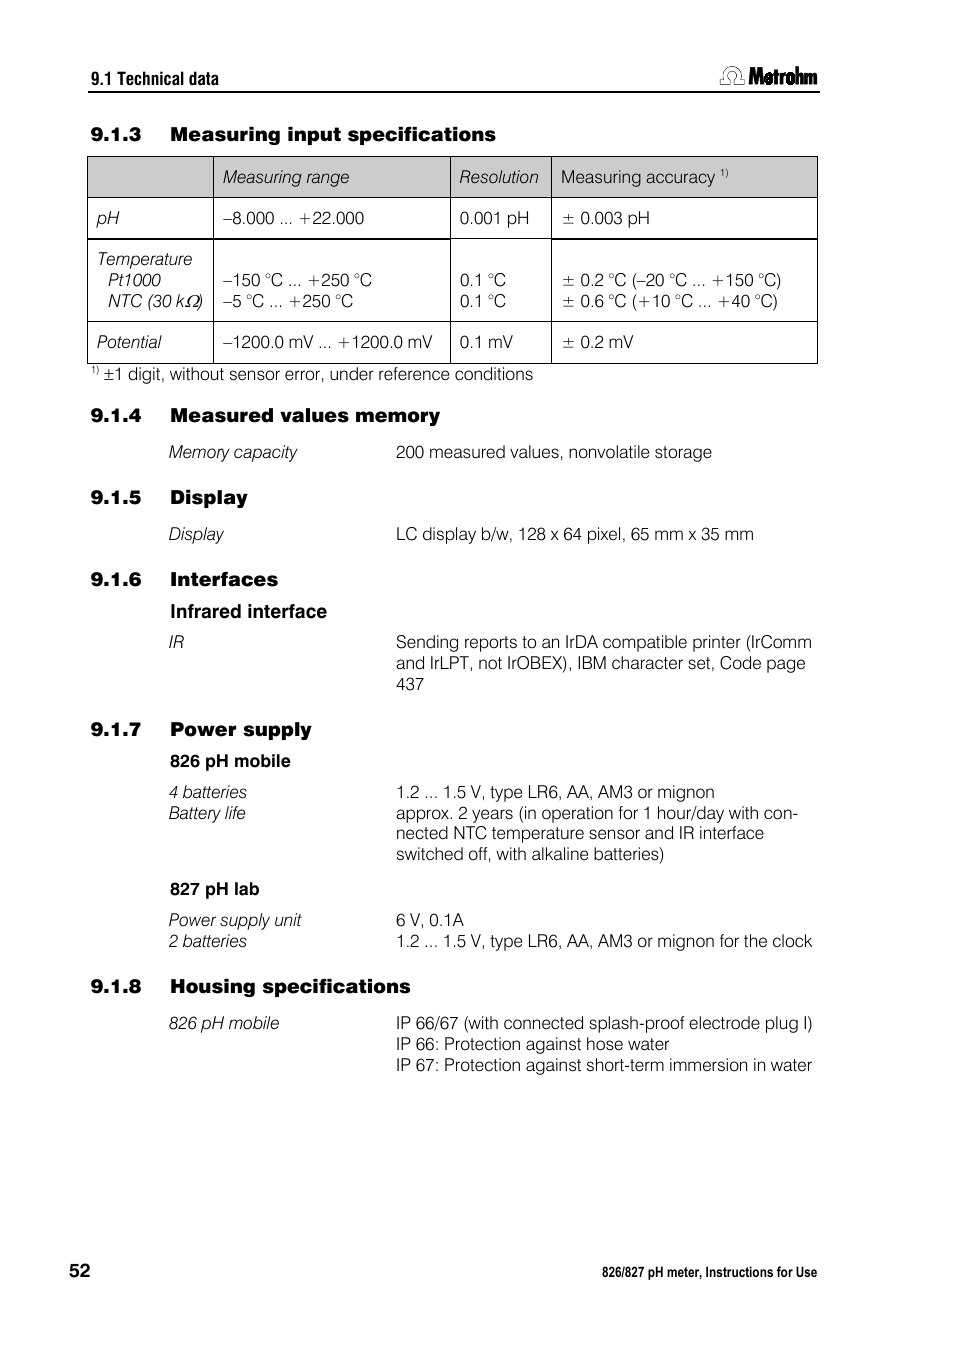 Metrohm 827 pH lab User Manual | Page 60 / 82 | Also for: 826 pH mobile